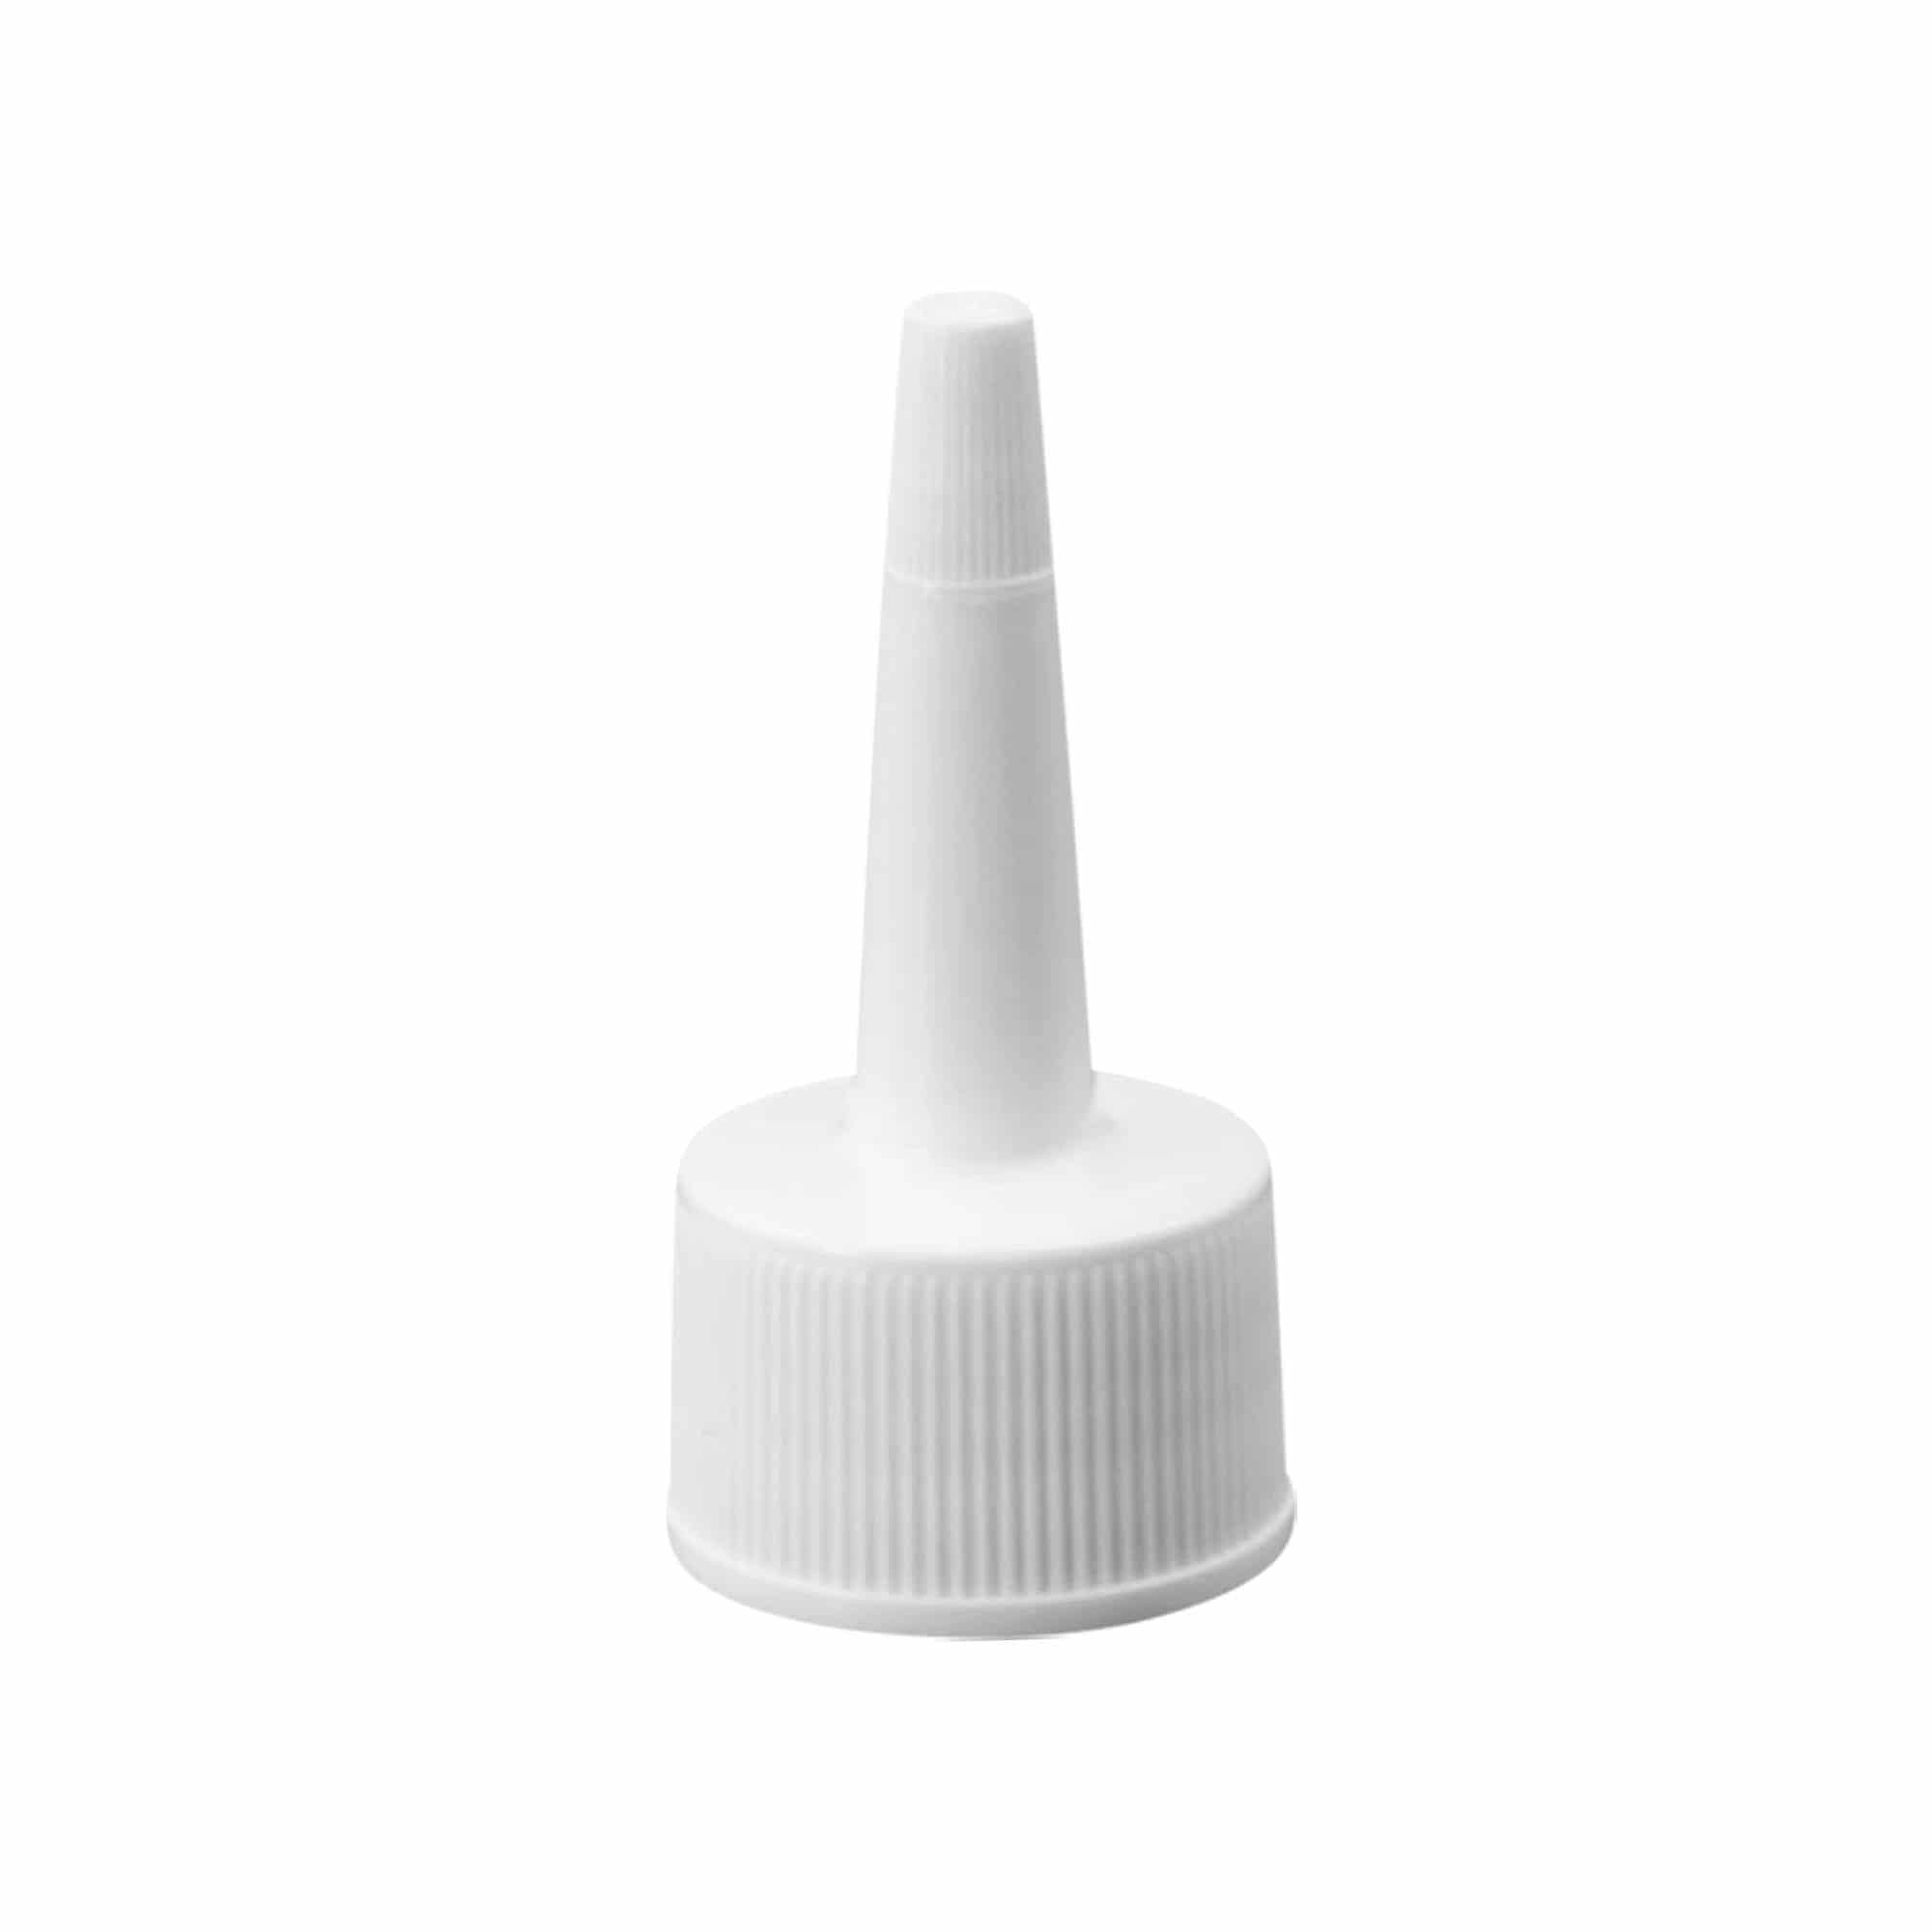 Screw cap with applicator, PP plastic, white, for opening: GPI 24/410